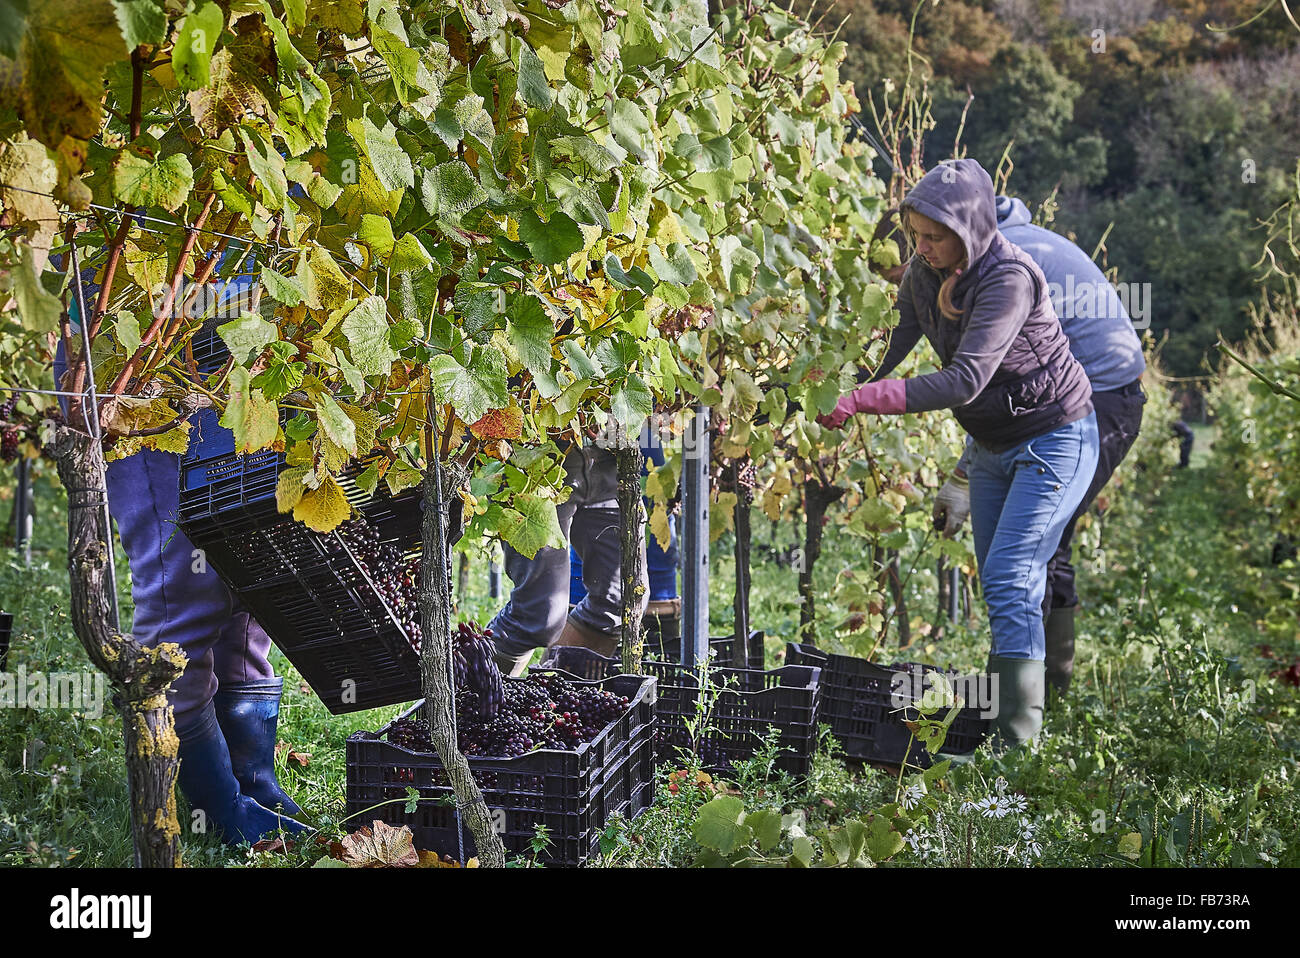 grape pickers in a vineyard Stock Photo